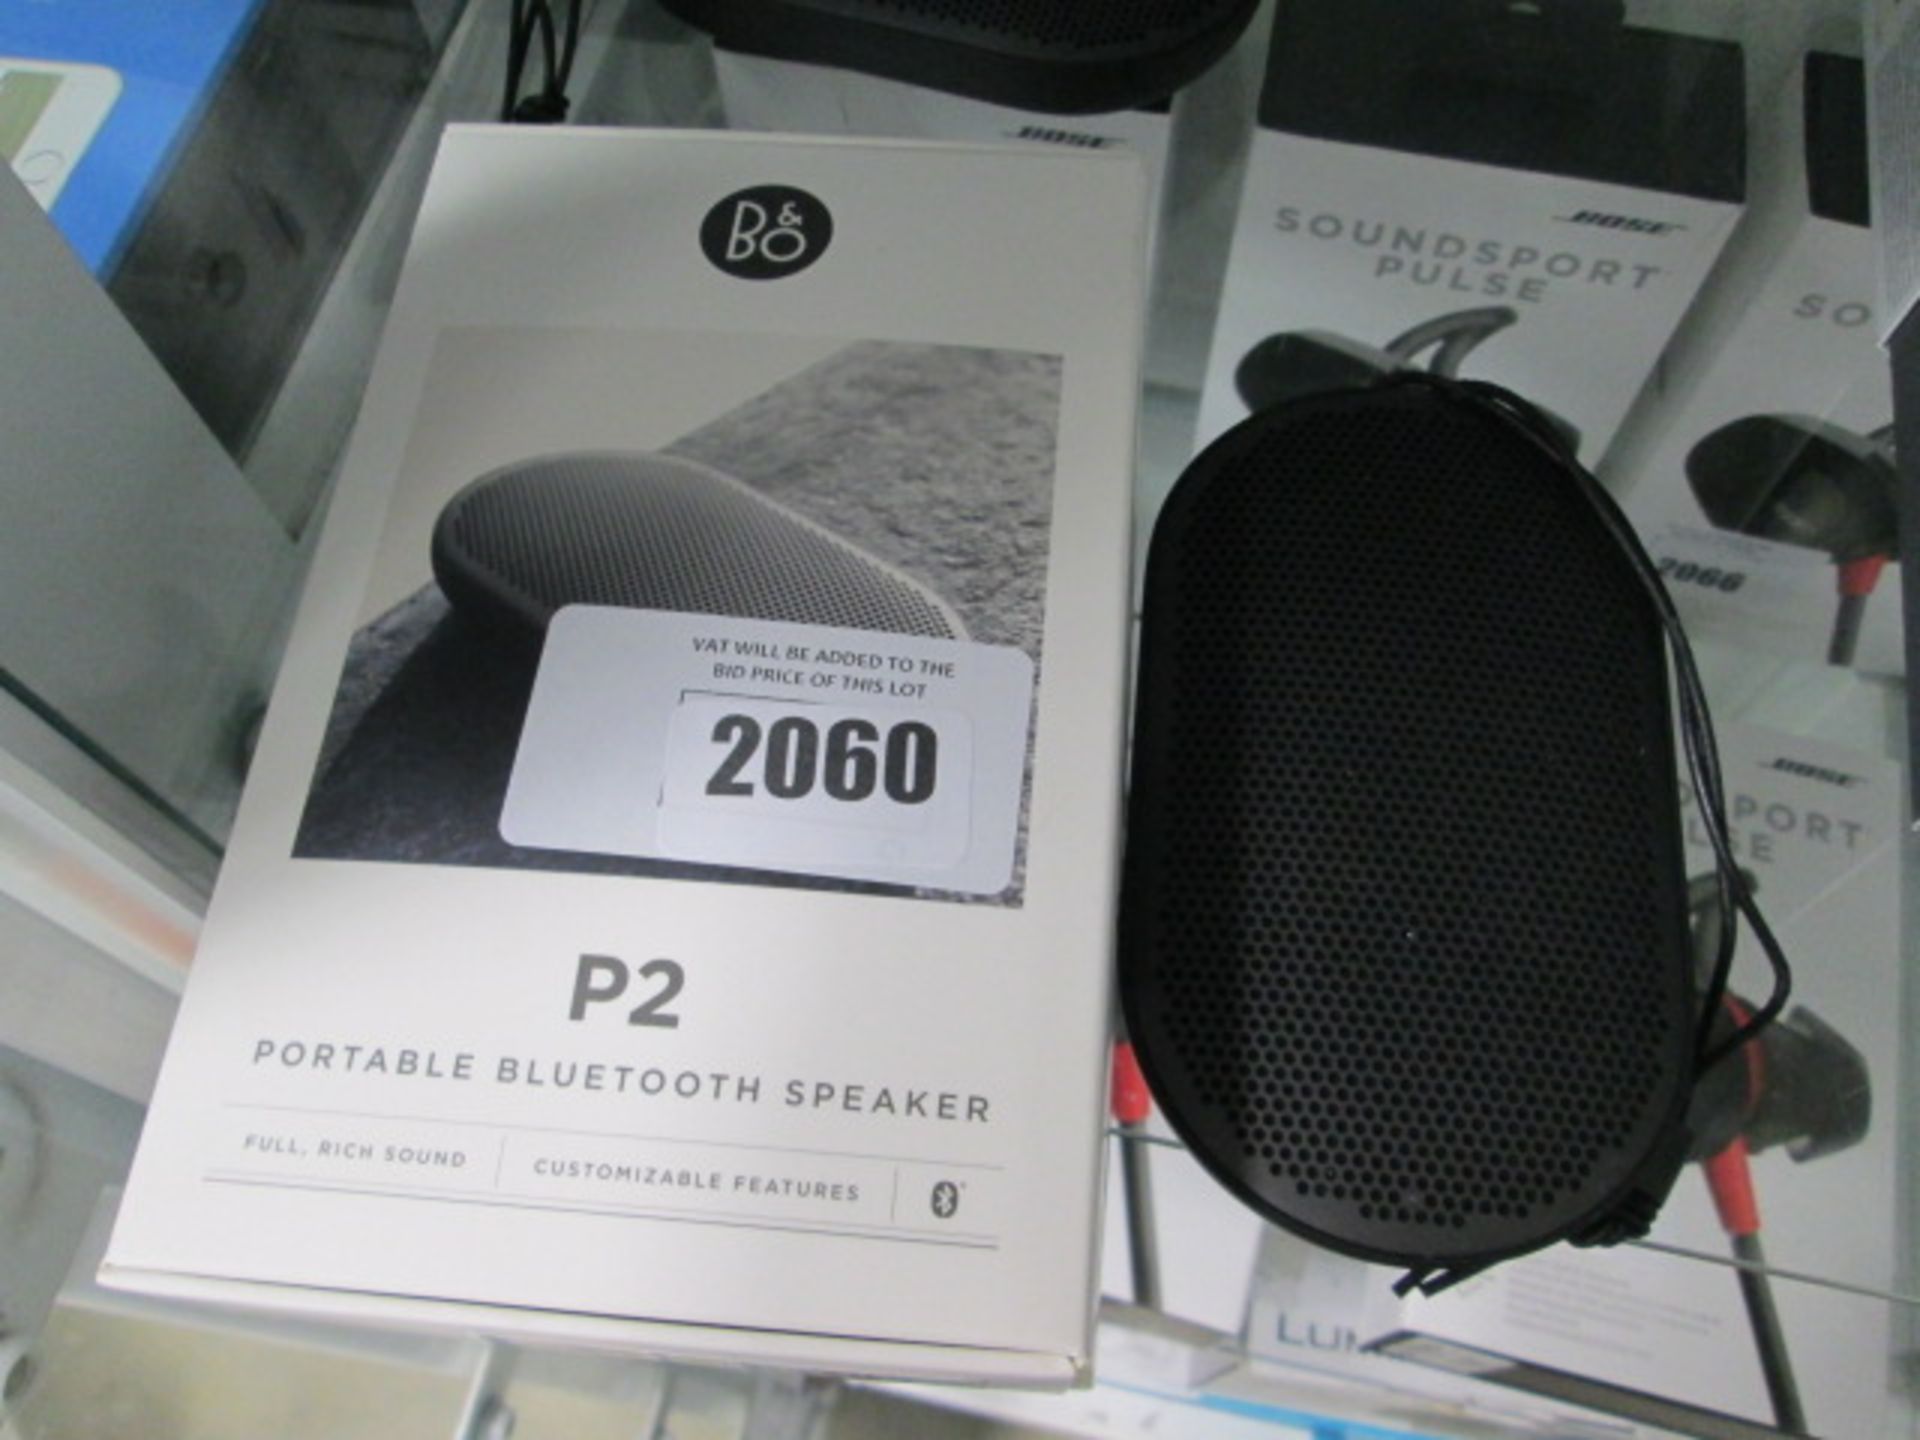 Bang & Olufsen P2 portable bluetooth speaker with box